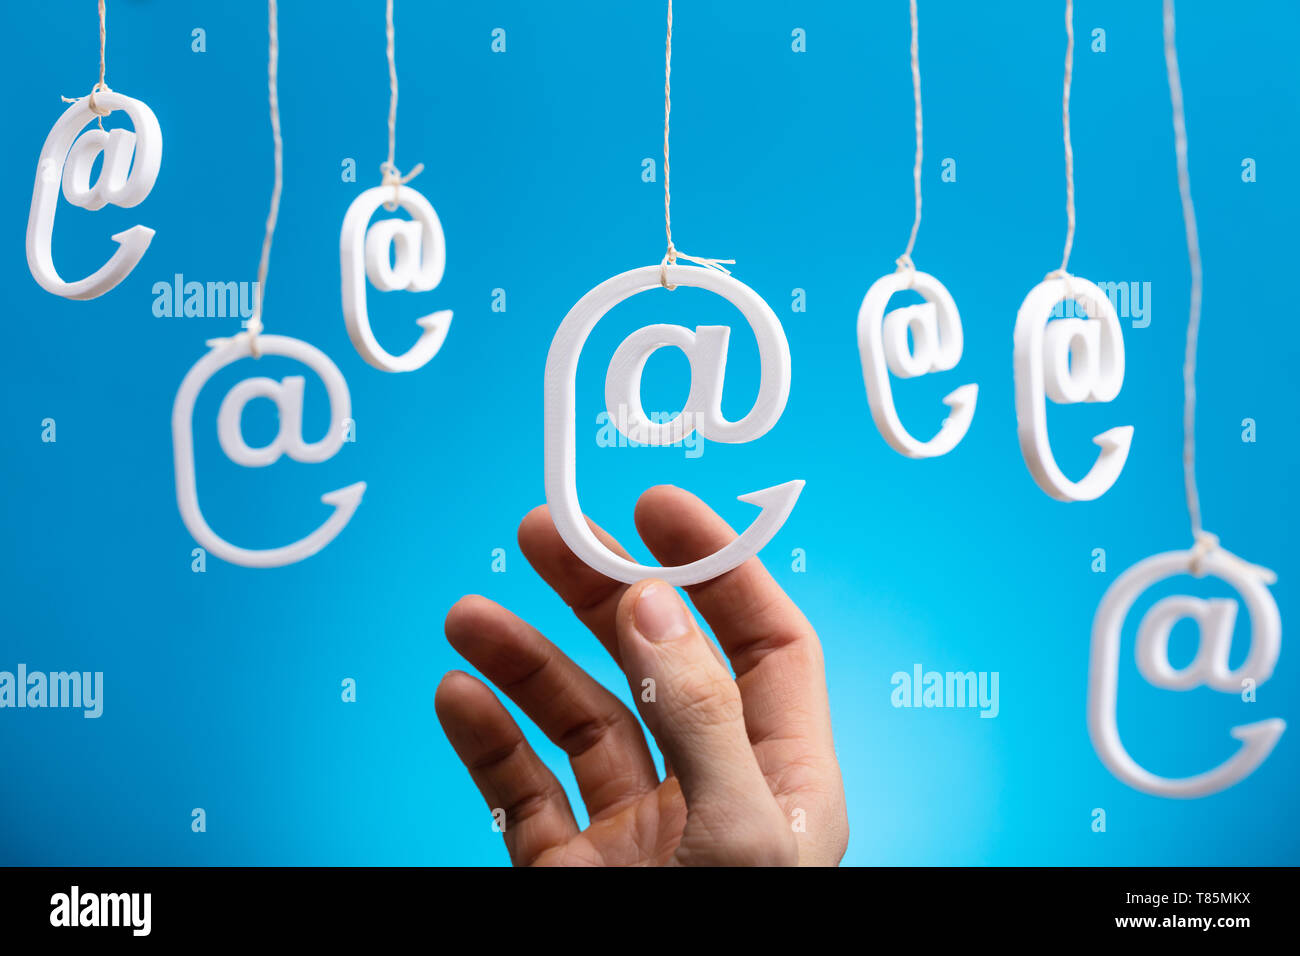 Human's Hand Holding Hanging Email Icons Against Blue Background Stock Photo